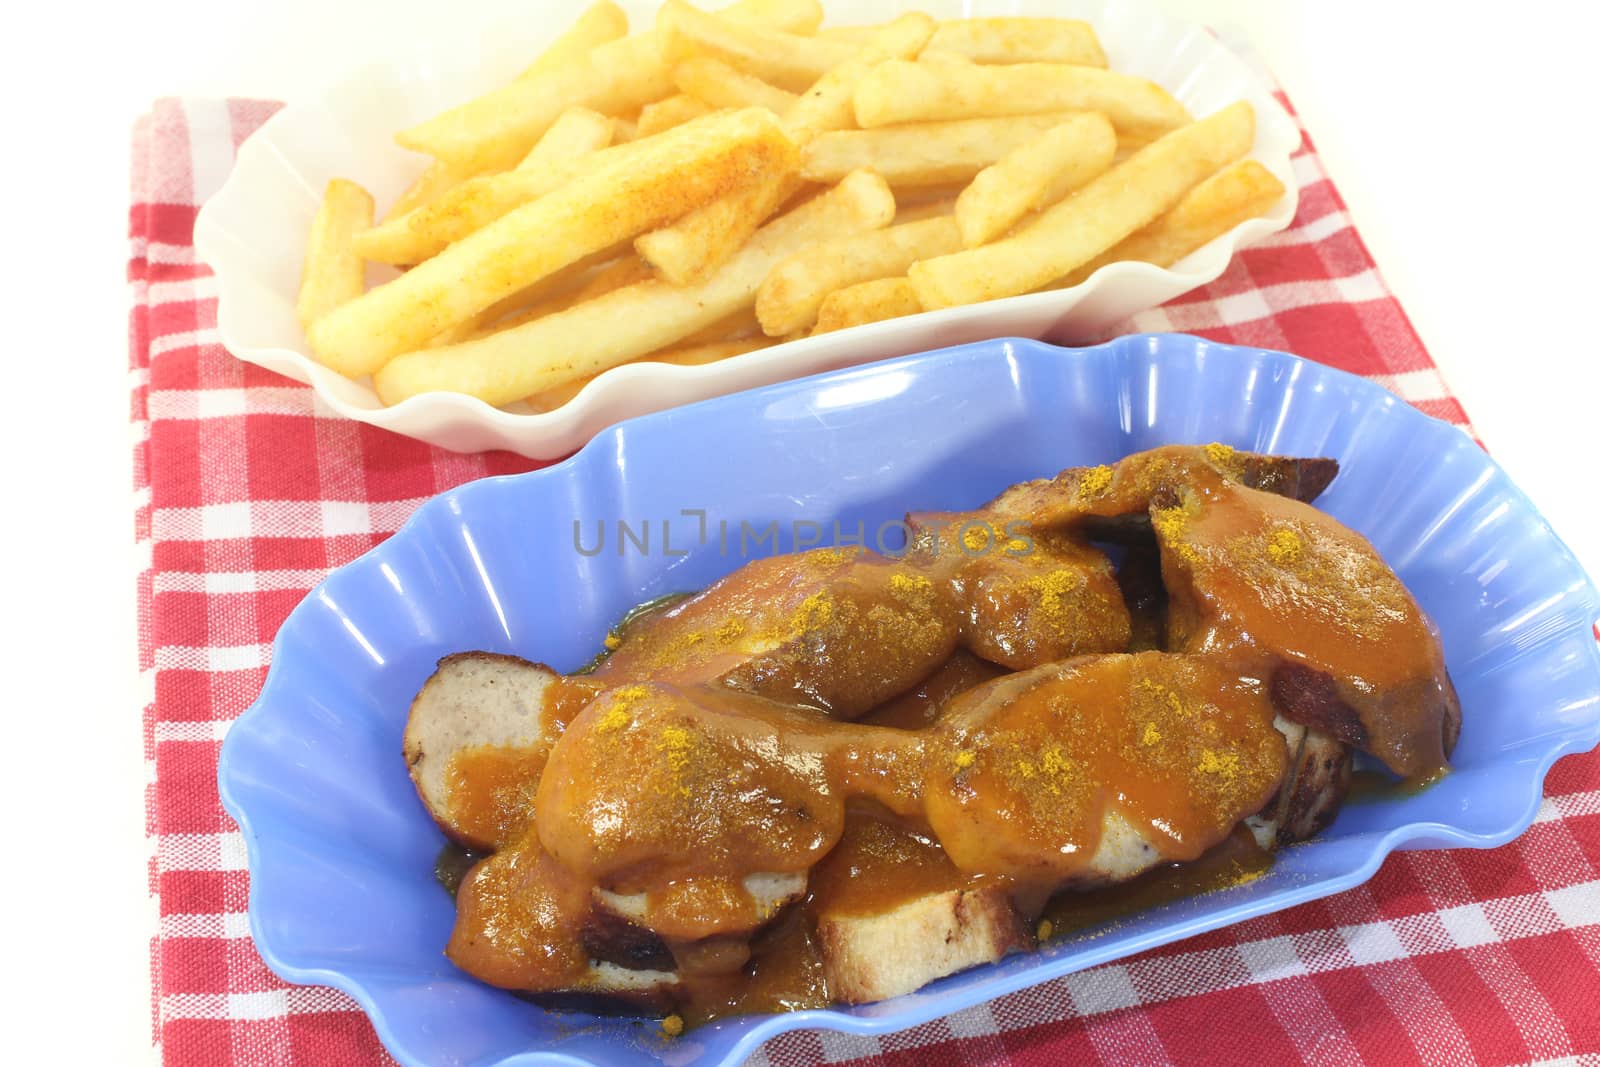 Currywurst with french fries on a light background